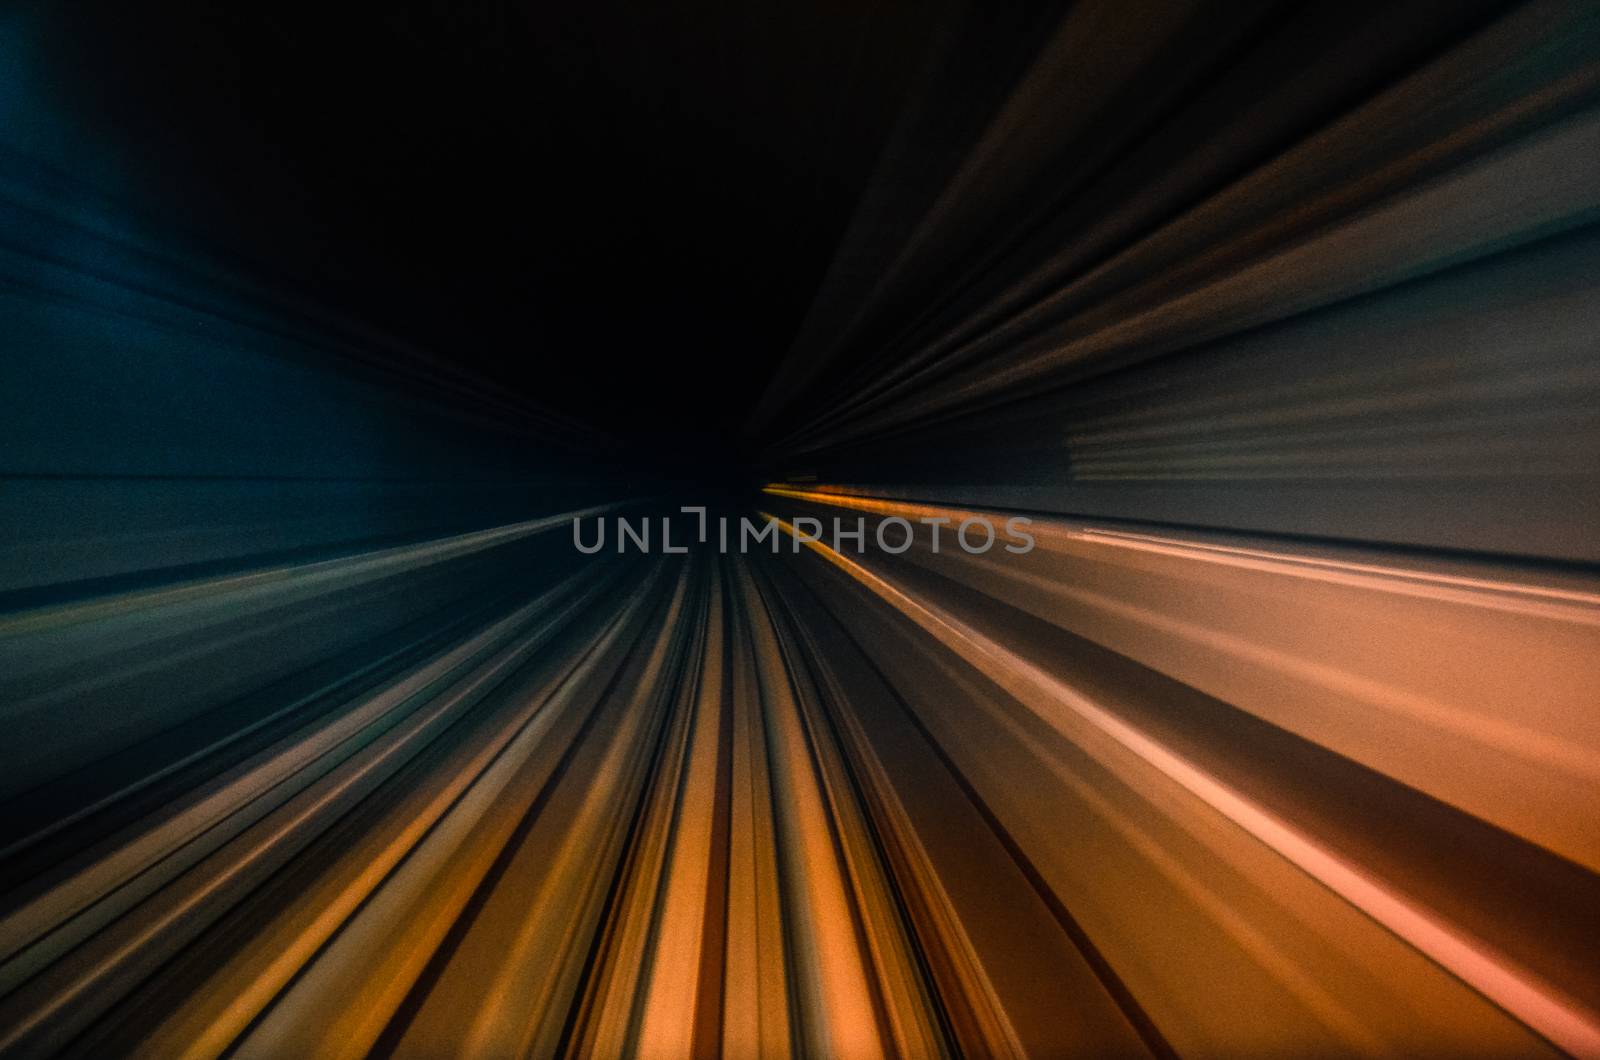 Subway tunnel with Motion blur of a city from inside by chernobrovin